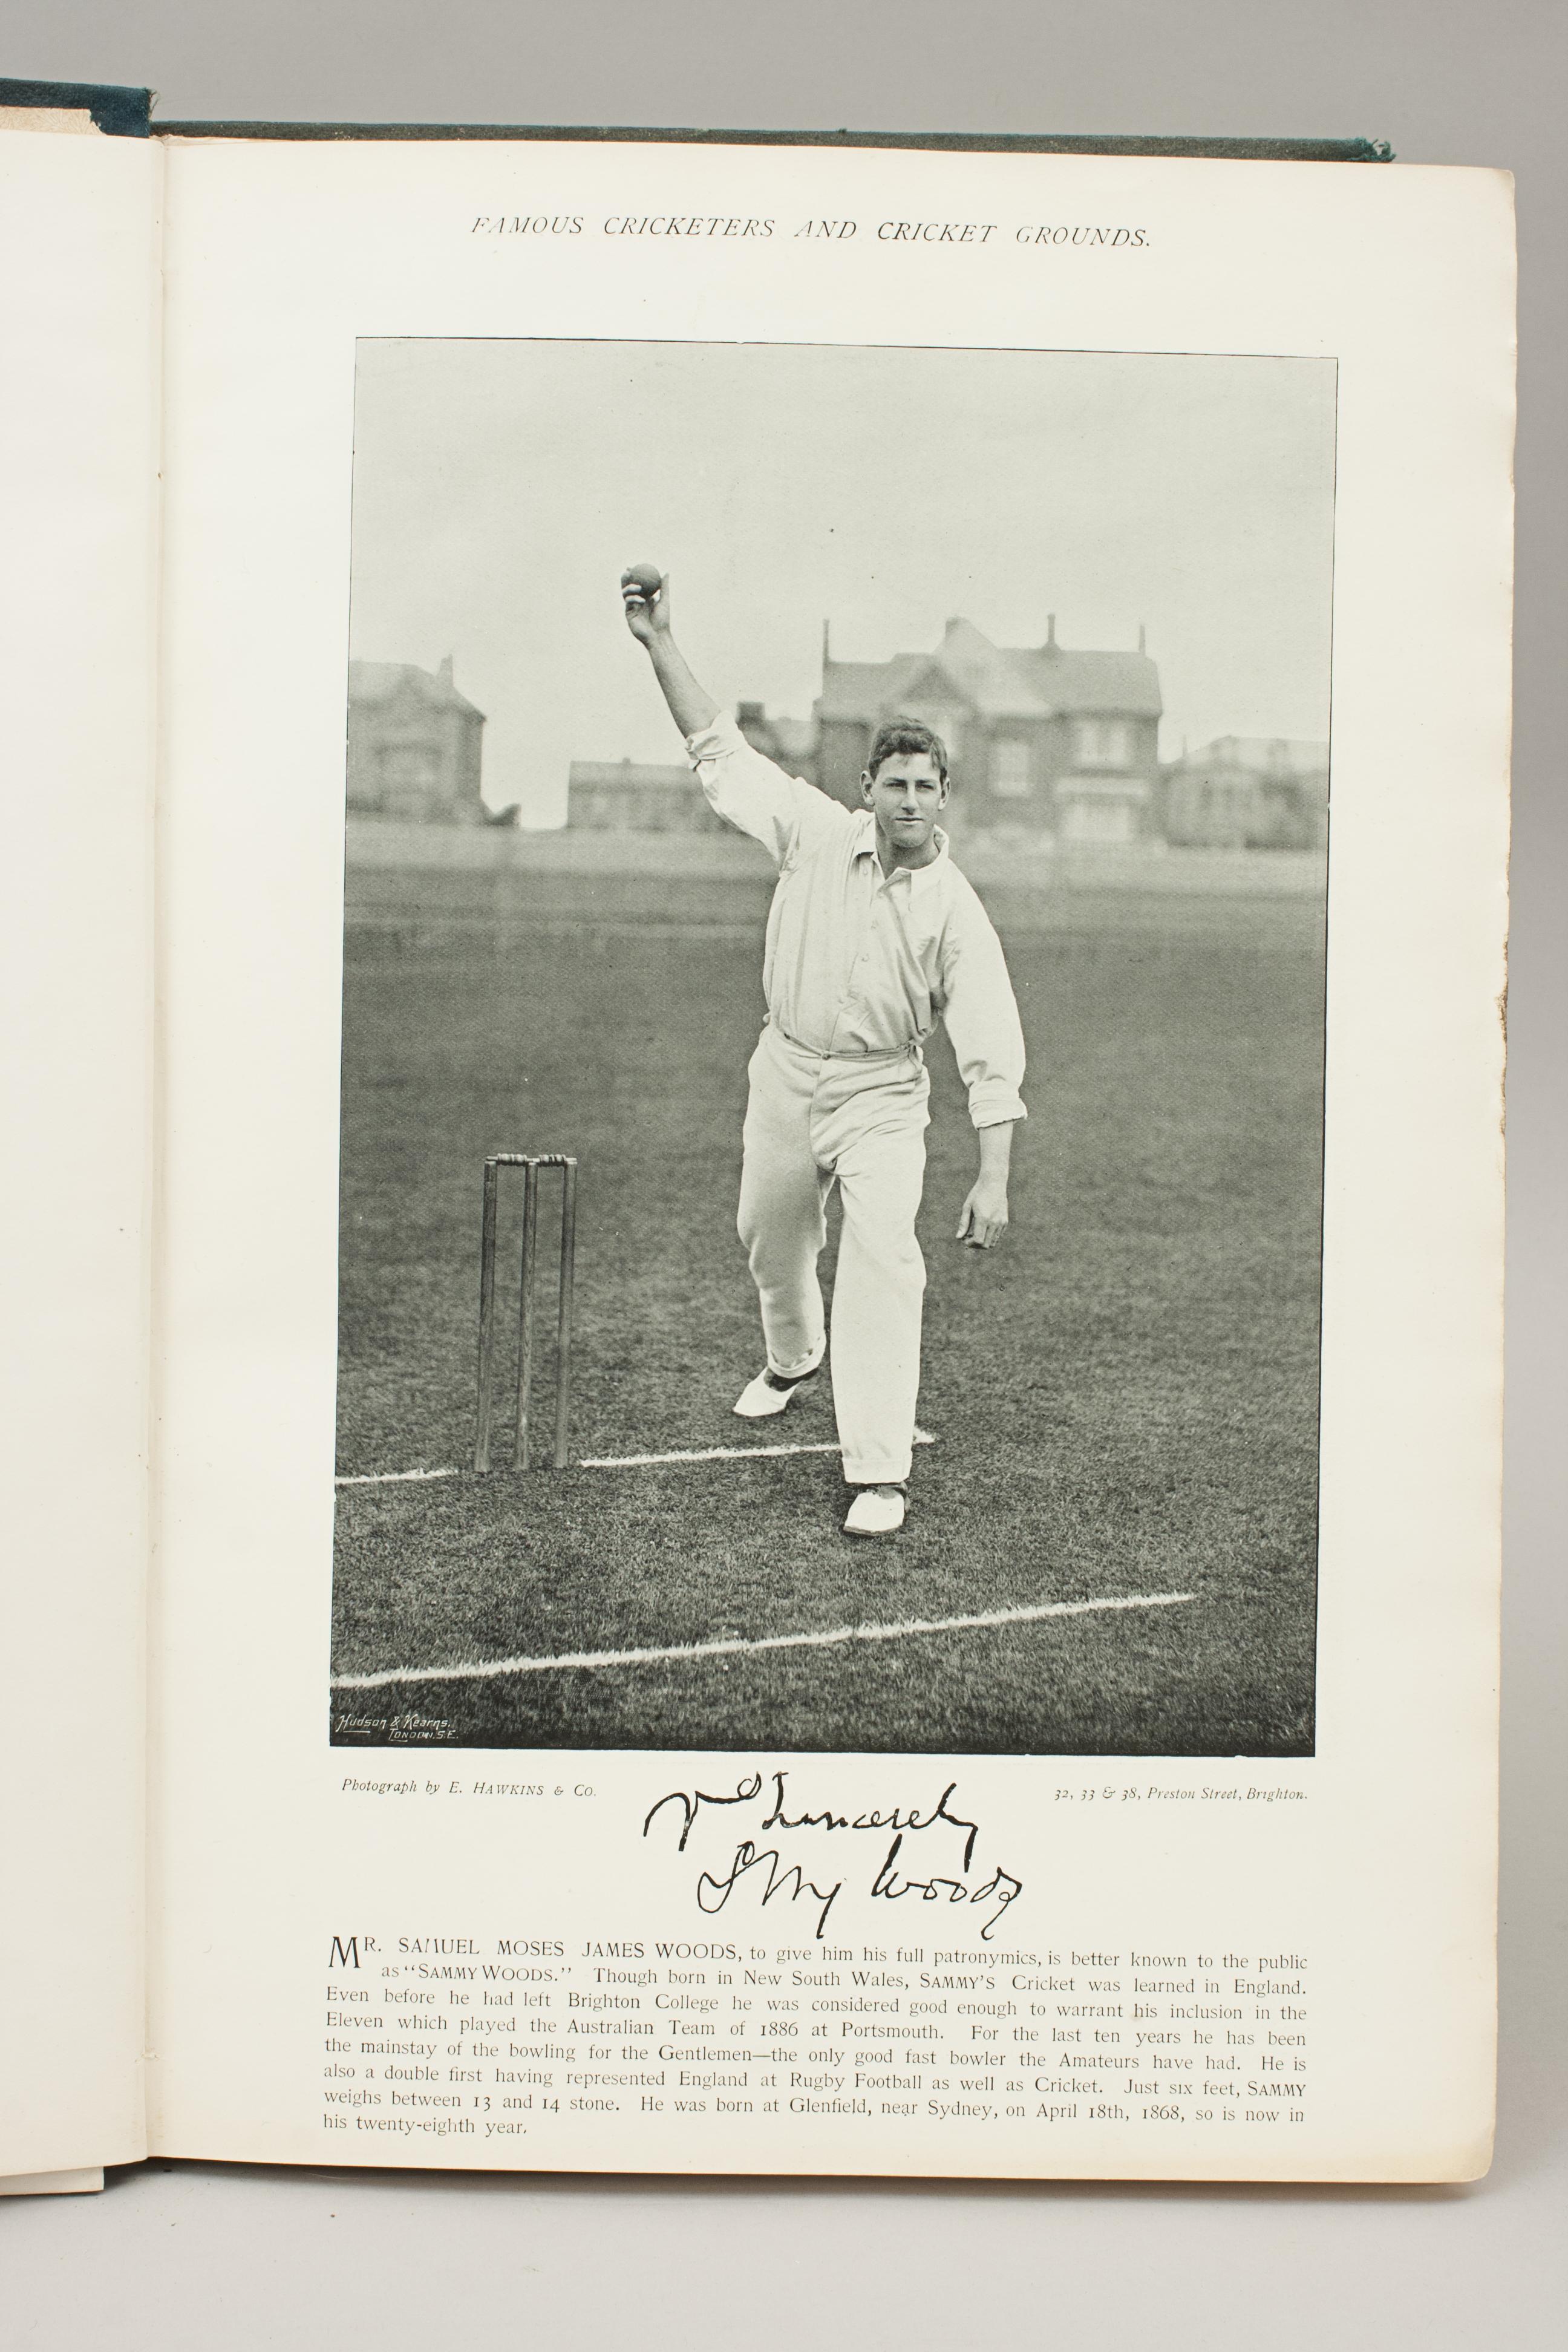 Paper Cricket Book, Famous Cricketers and Cricket Grounds, 1895